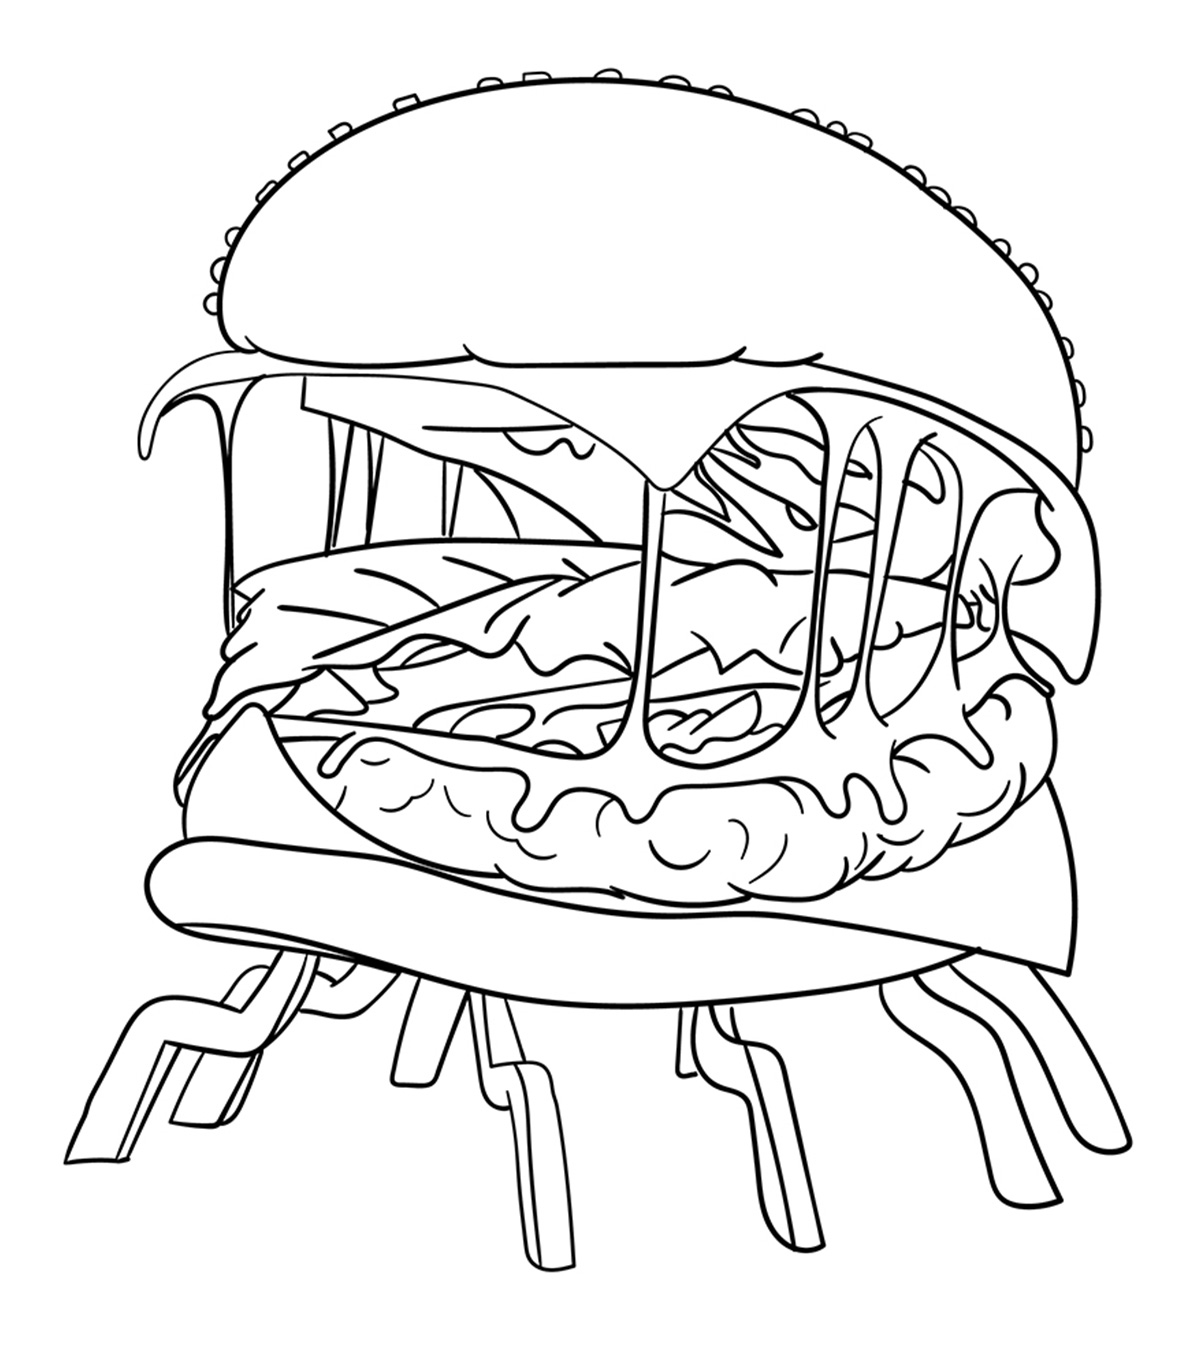 10 Printable Burger Coloring Pages For Your Little One_image